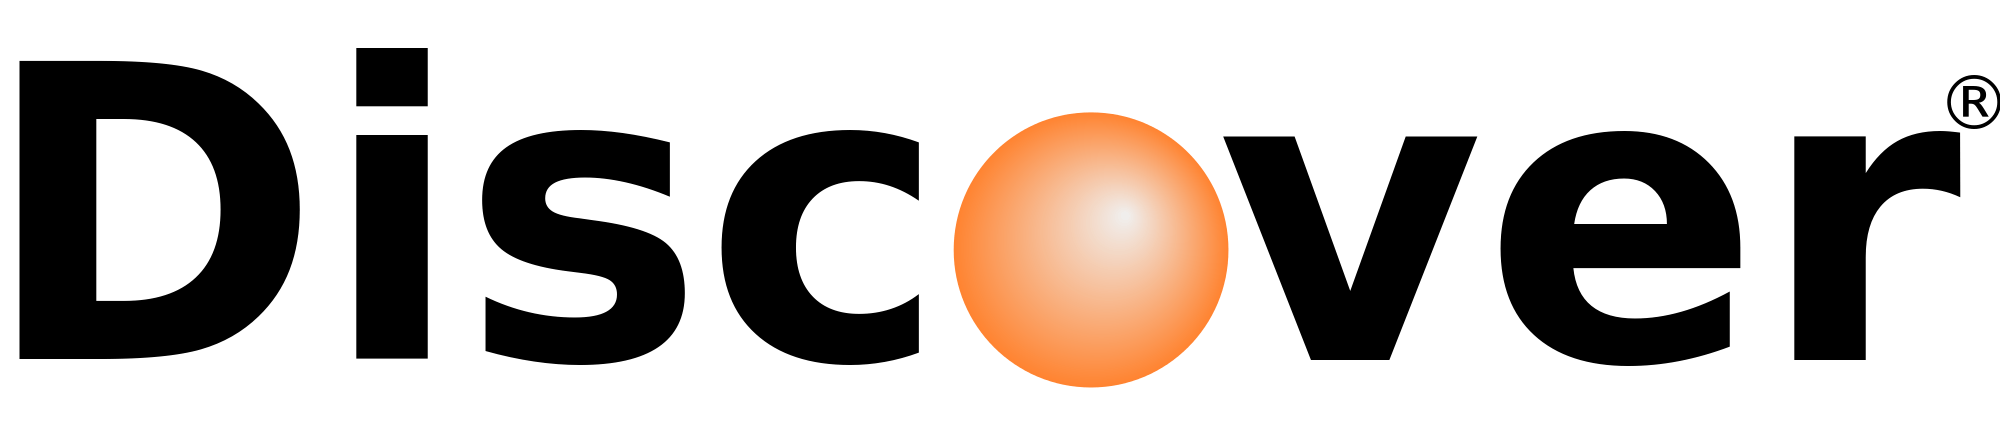 Discover Card Logo - File:DiscoverCard.svg - Wikimedia Commons